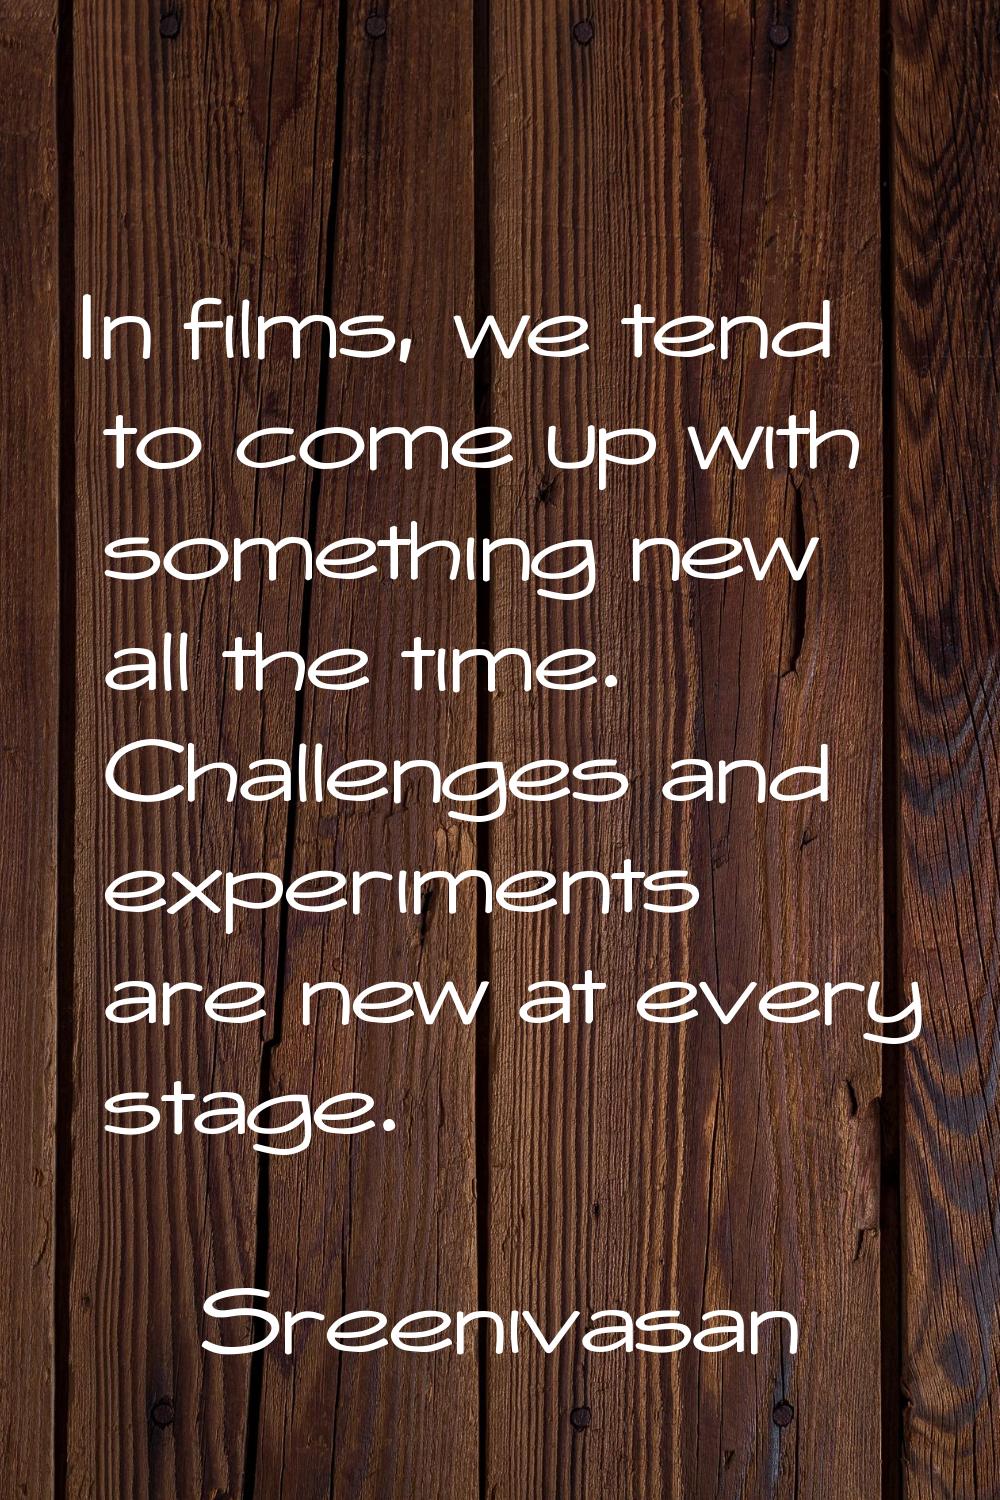 In films, we tend to come up with something new all the time. Challenges and experiments are new at